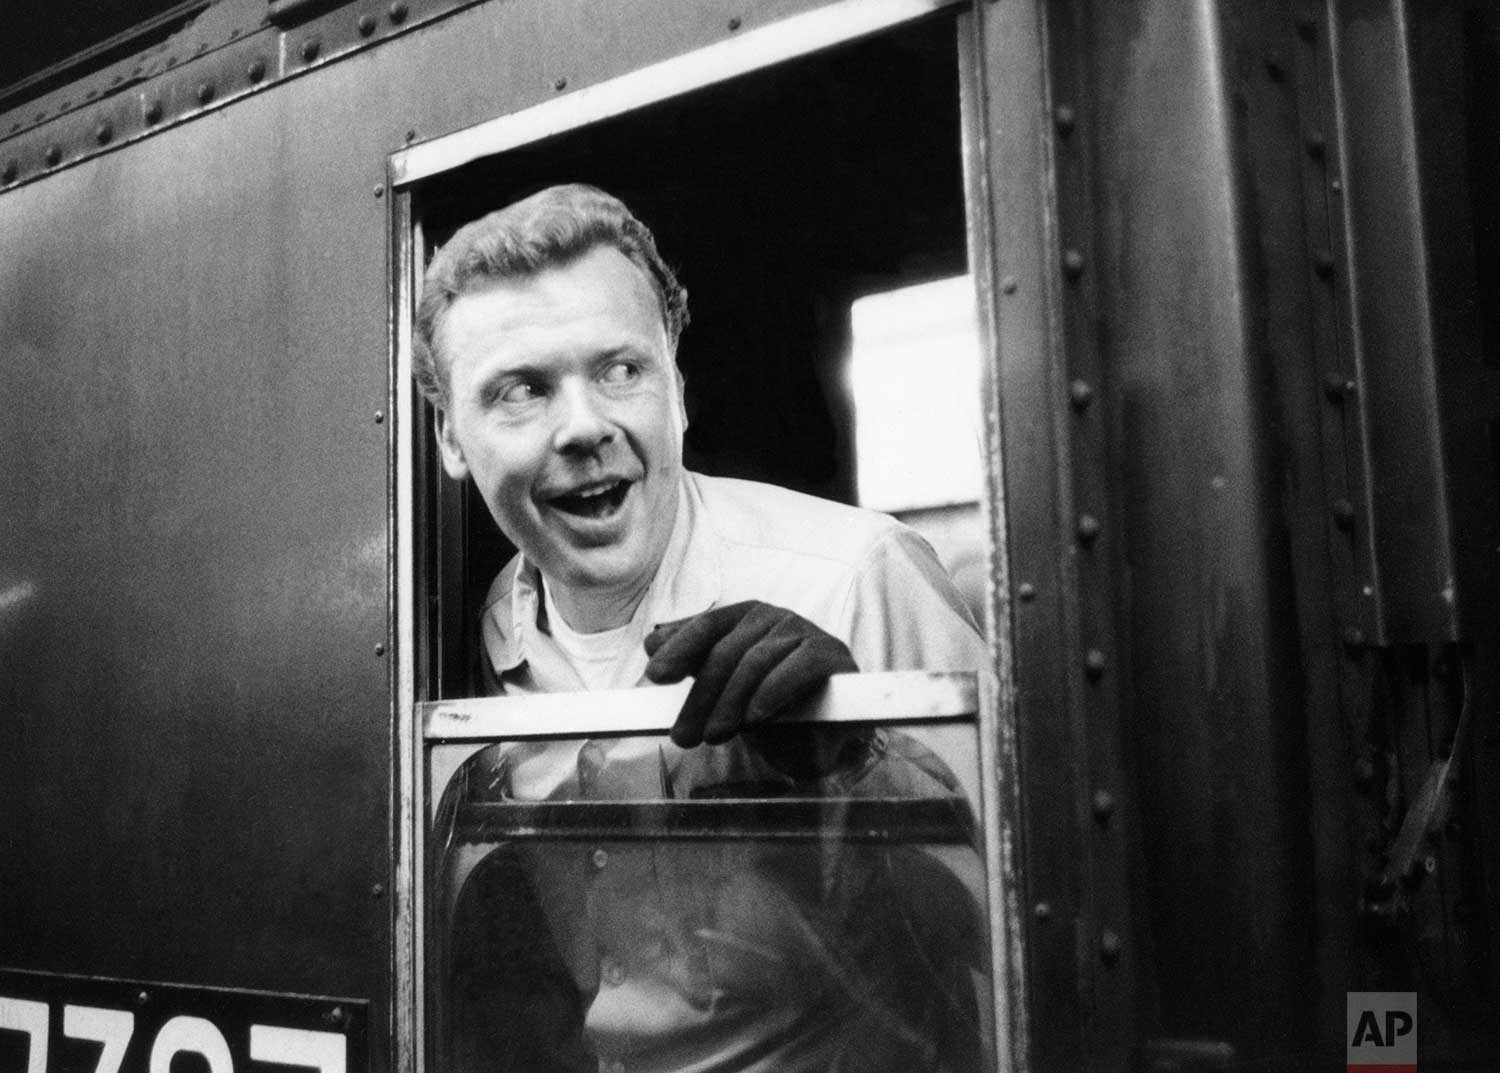  An unidentified conductor for an IRT subway train is shown on the job in New York, July 10, 1970. (AP Photo) 